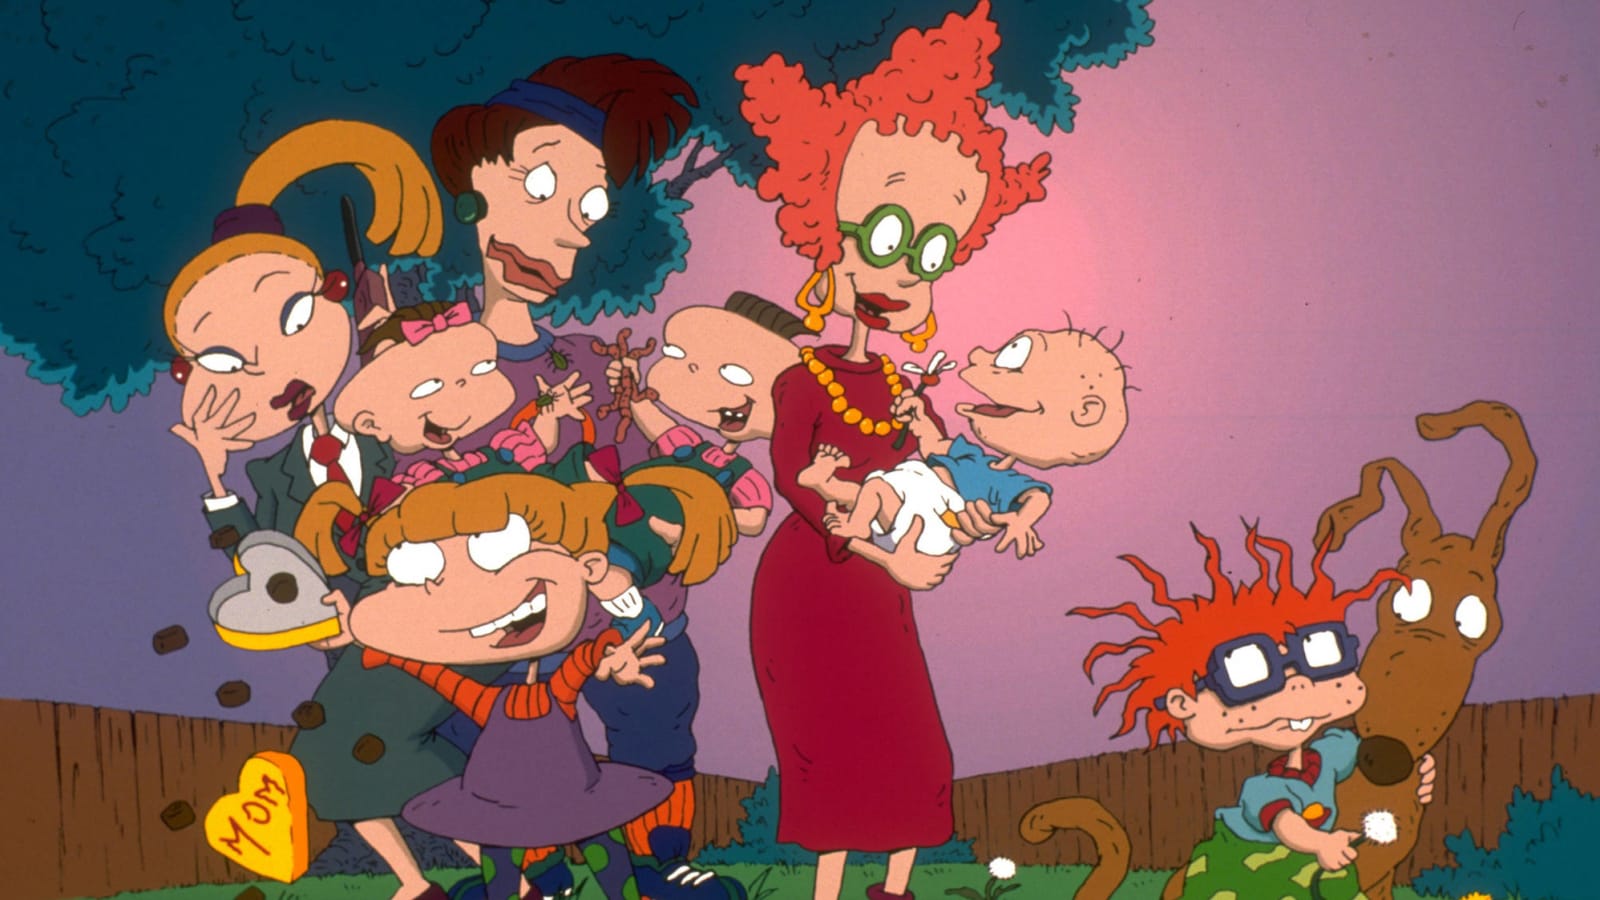 Betty to be openly gay single mom in 'Rugrats' reboot series